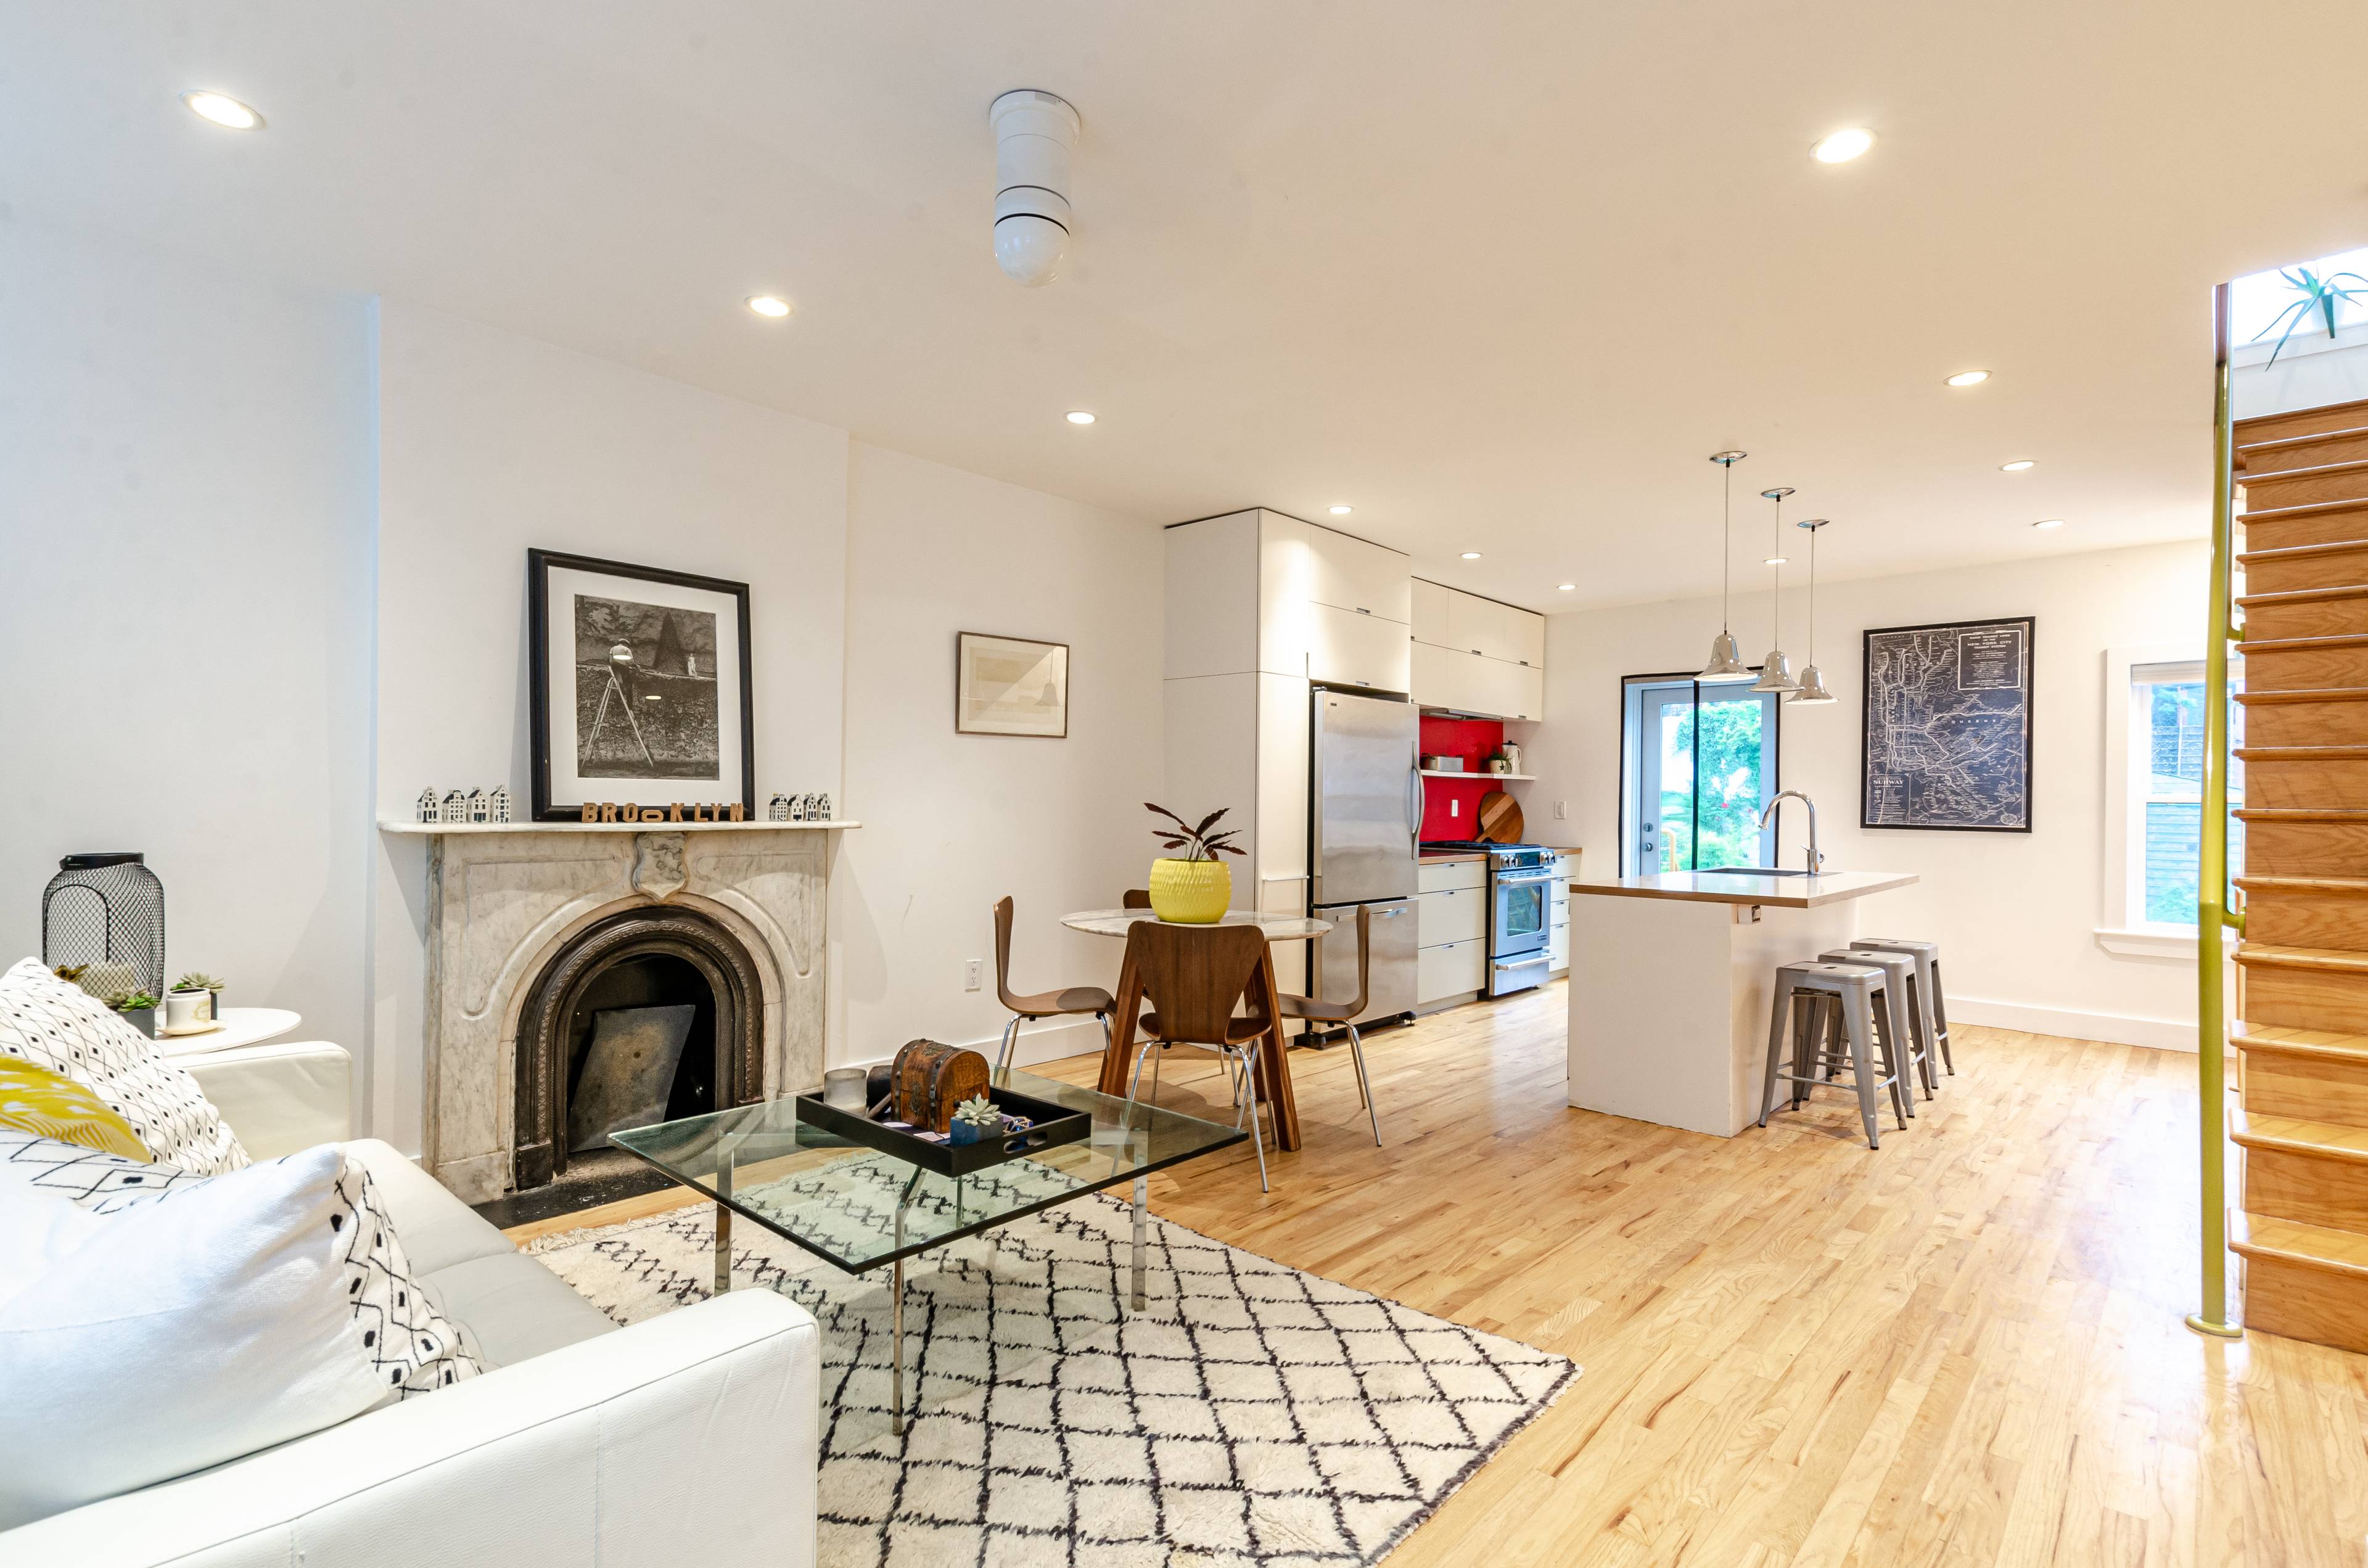 Your private Red Hook sanctuary awaits in this sophisticated three bedroom house with walled garden and garage.